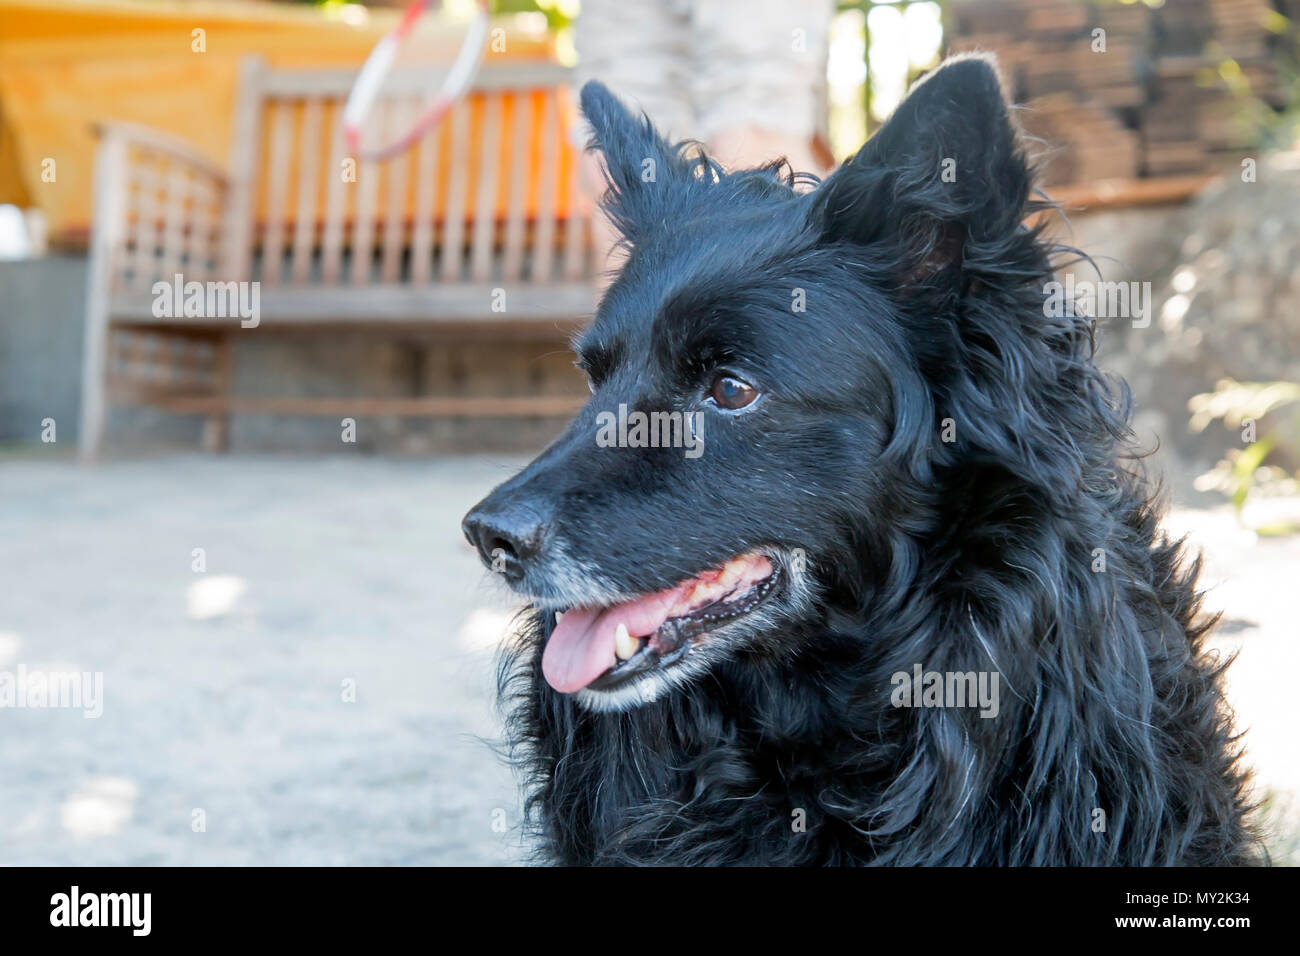 Croatian shepherd in the yard in front of the house Stock Photo